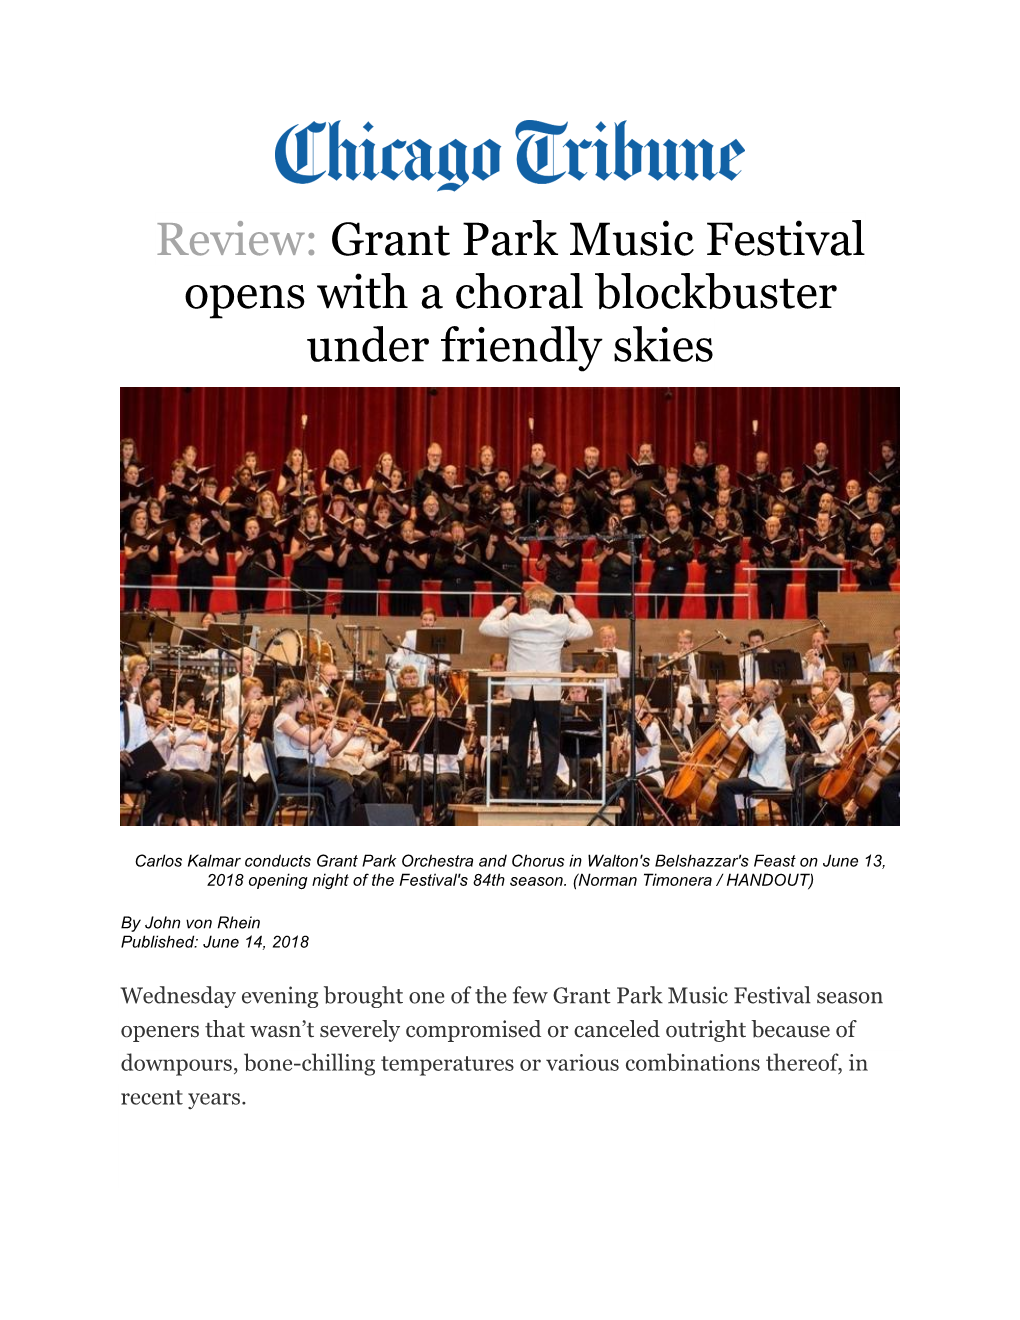 Grant Park Music Festival Opens with a Choral Blockbuster Under Friendly Skies